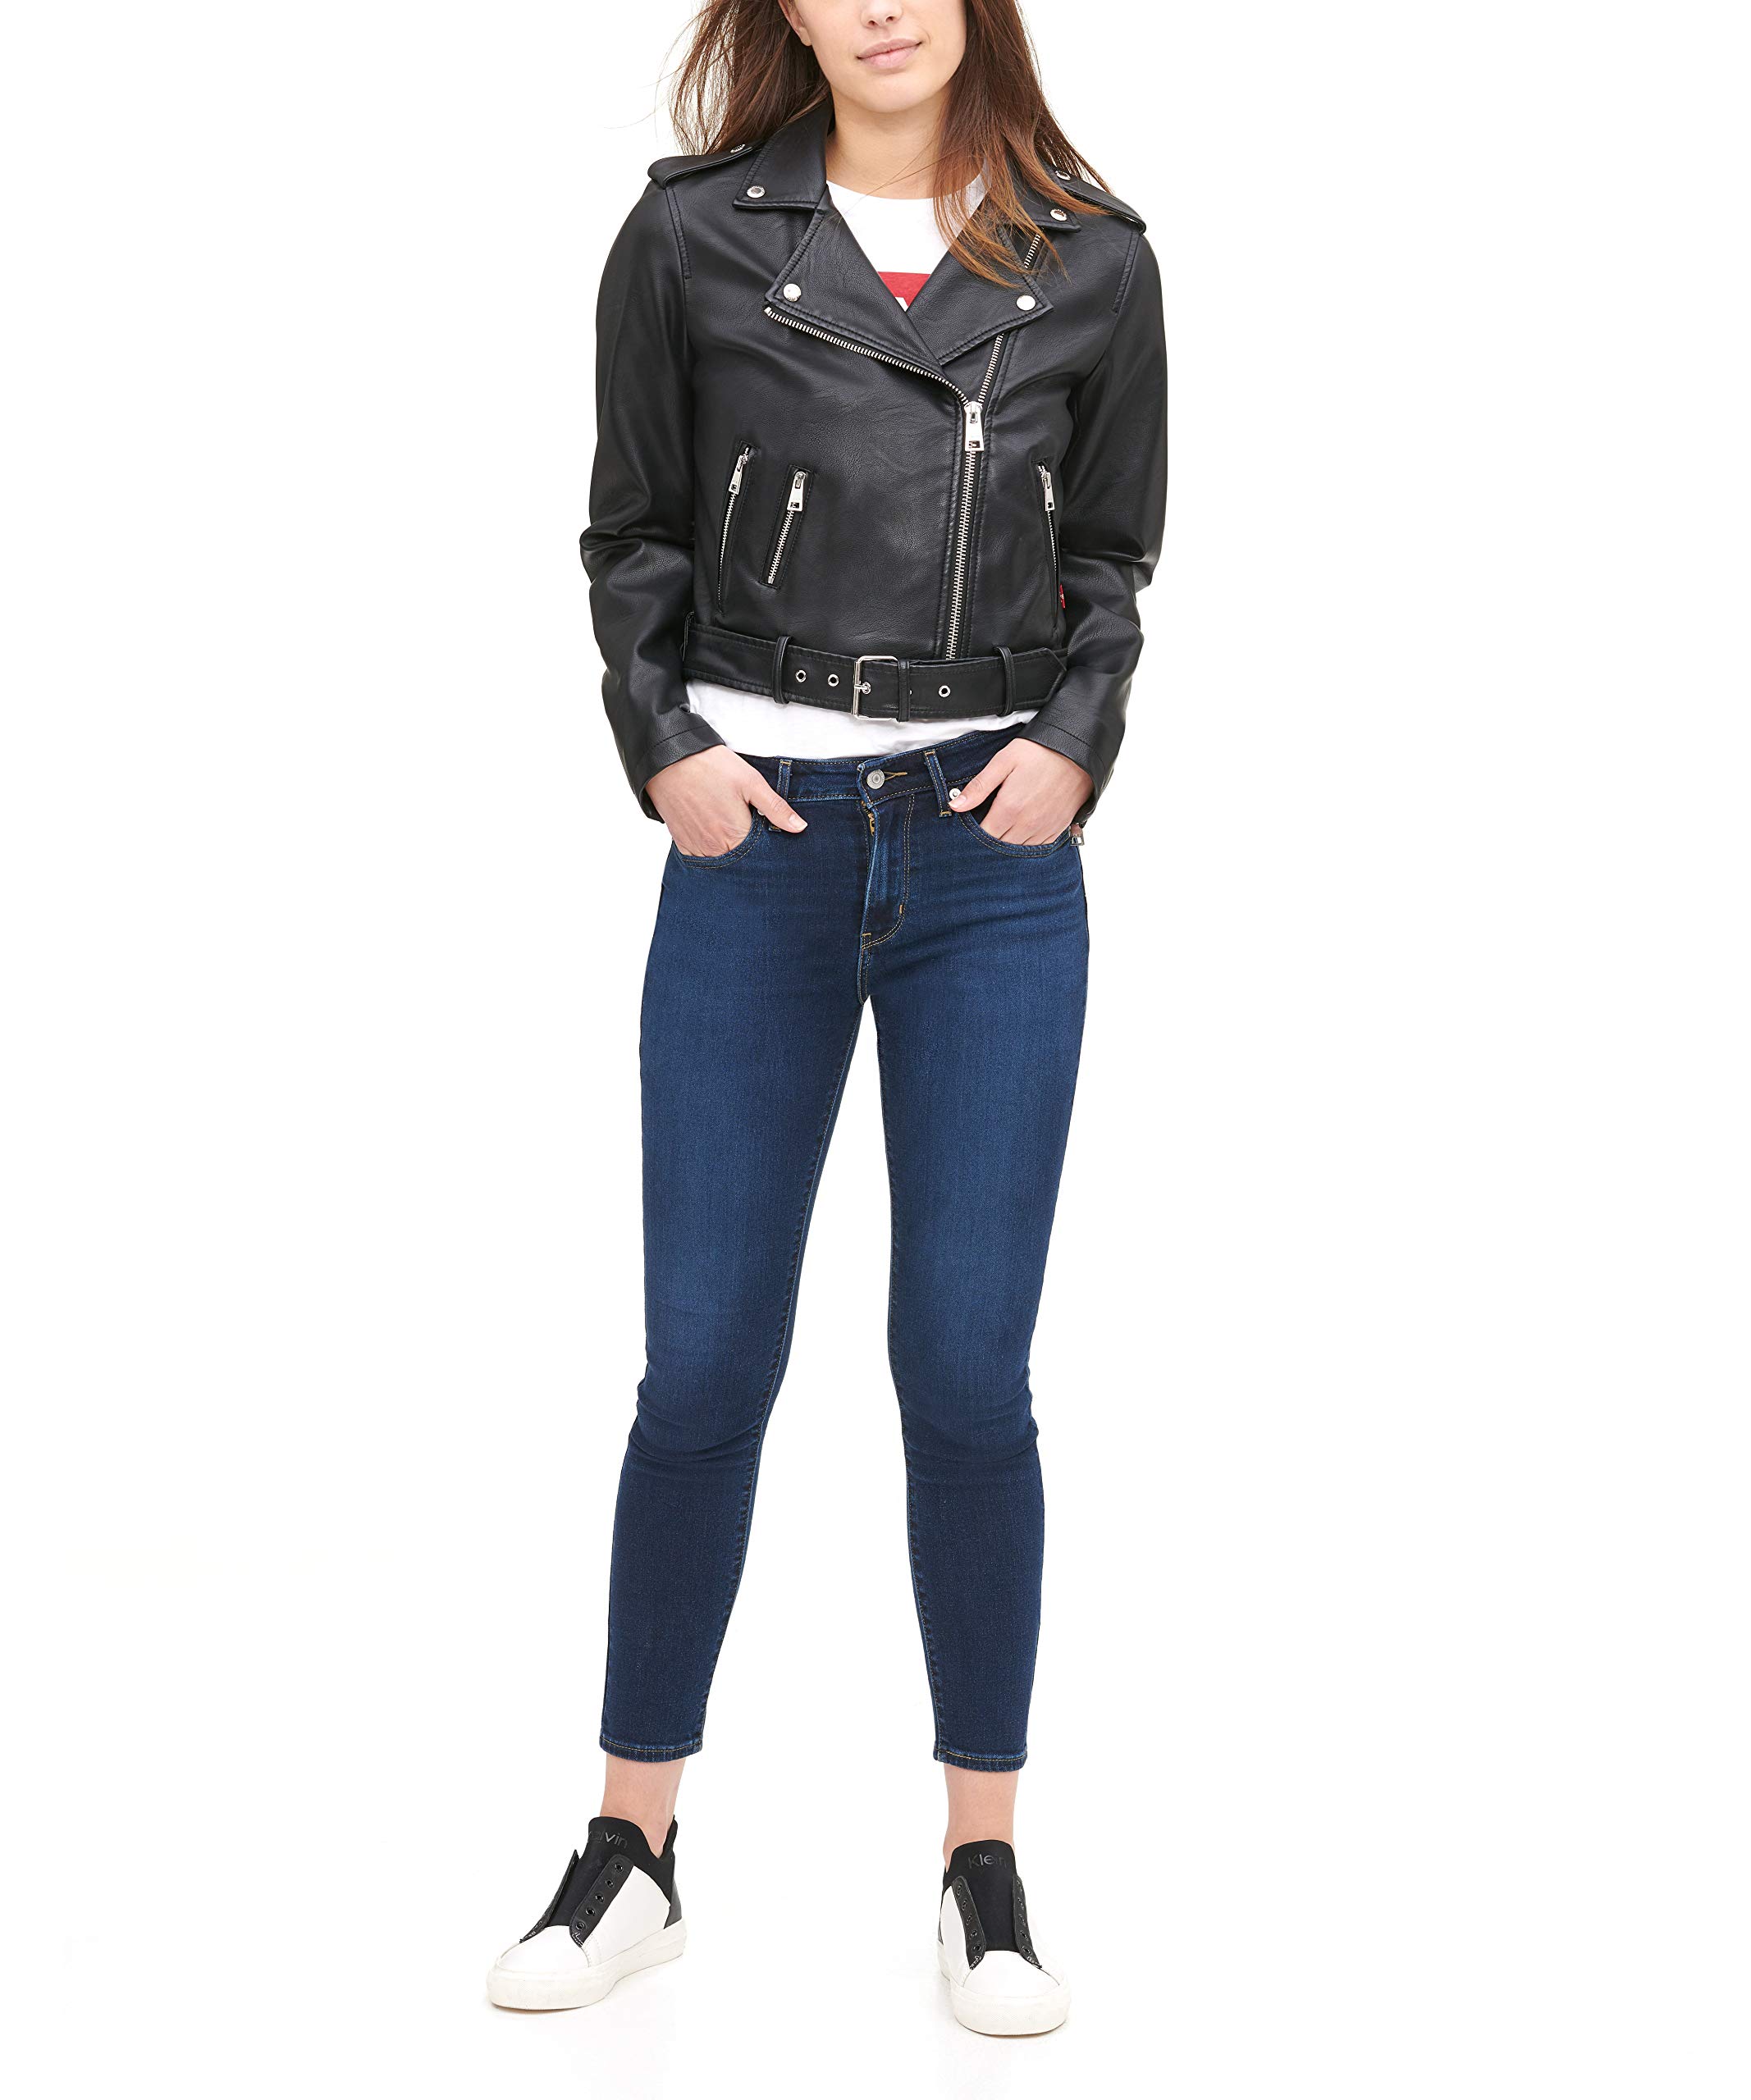 Levi's Women's Faux Leather Belted Motorcycle Jacket (Standard and Plus Sizes)